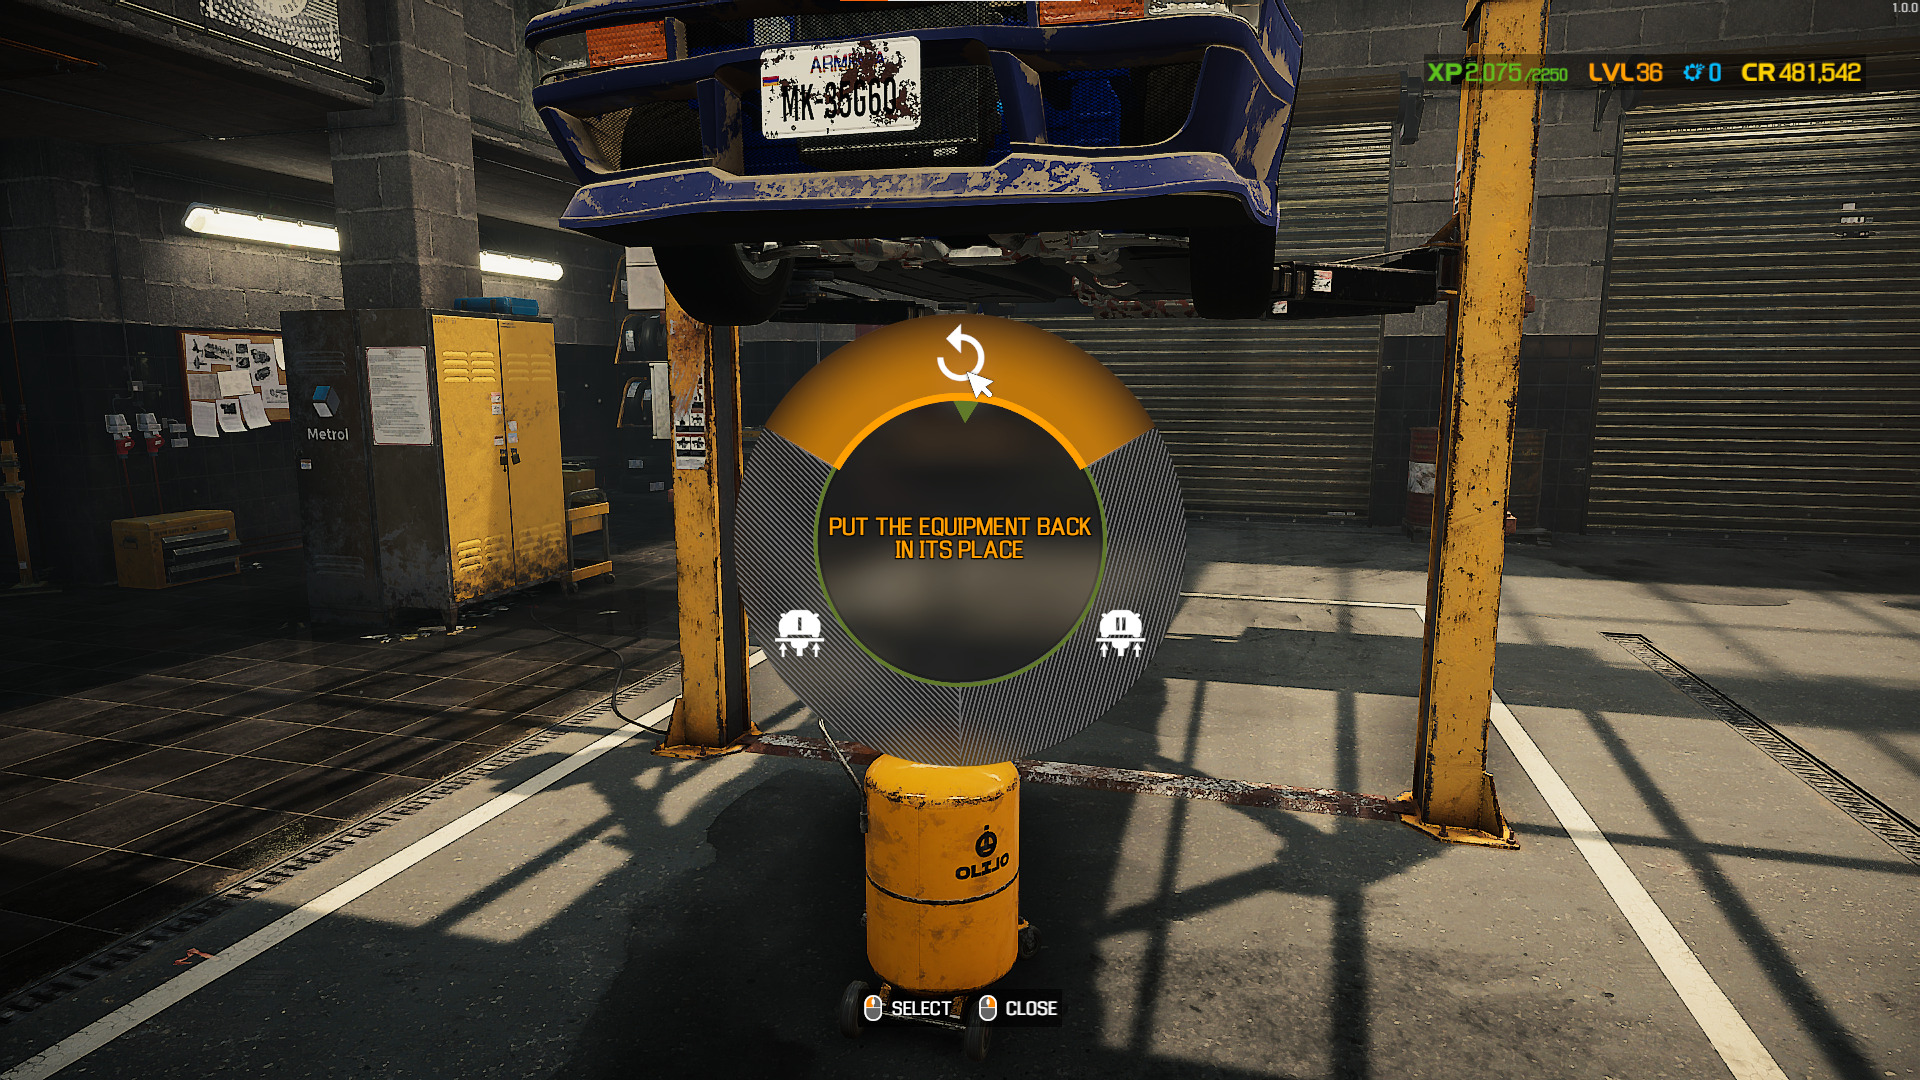 A screenshot showing how to put the equipment back in its place in Car Mechanic Simulator